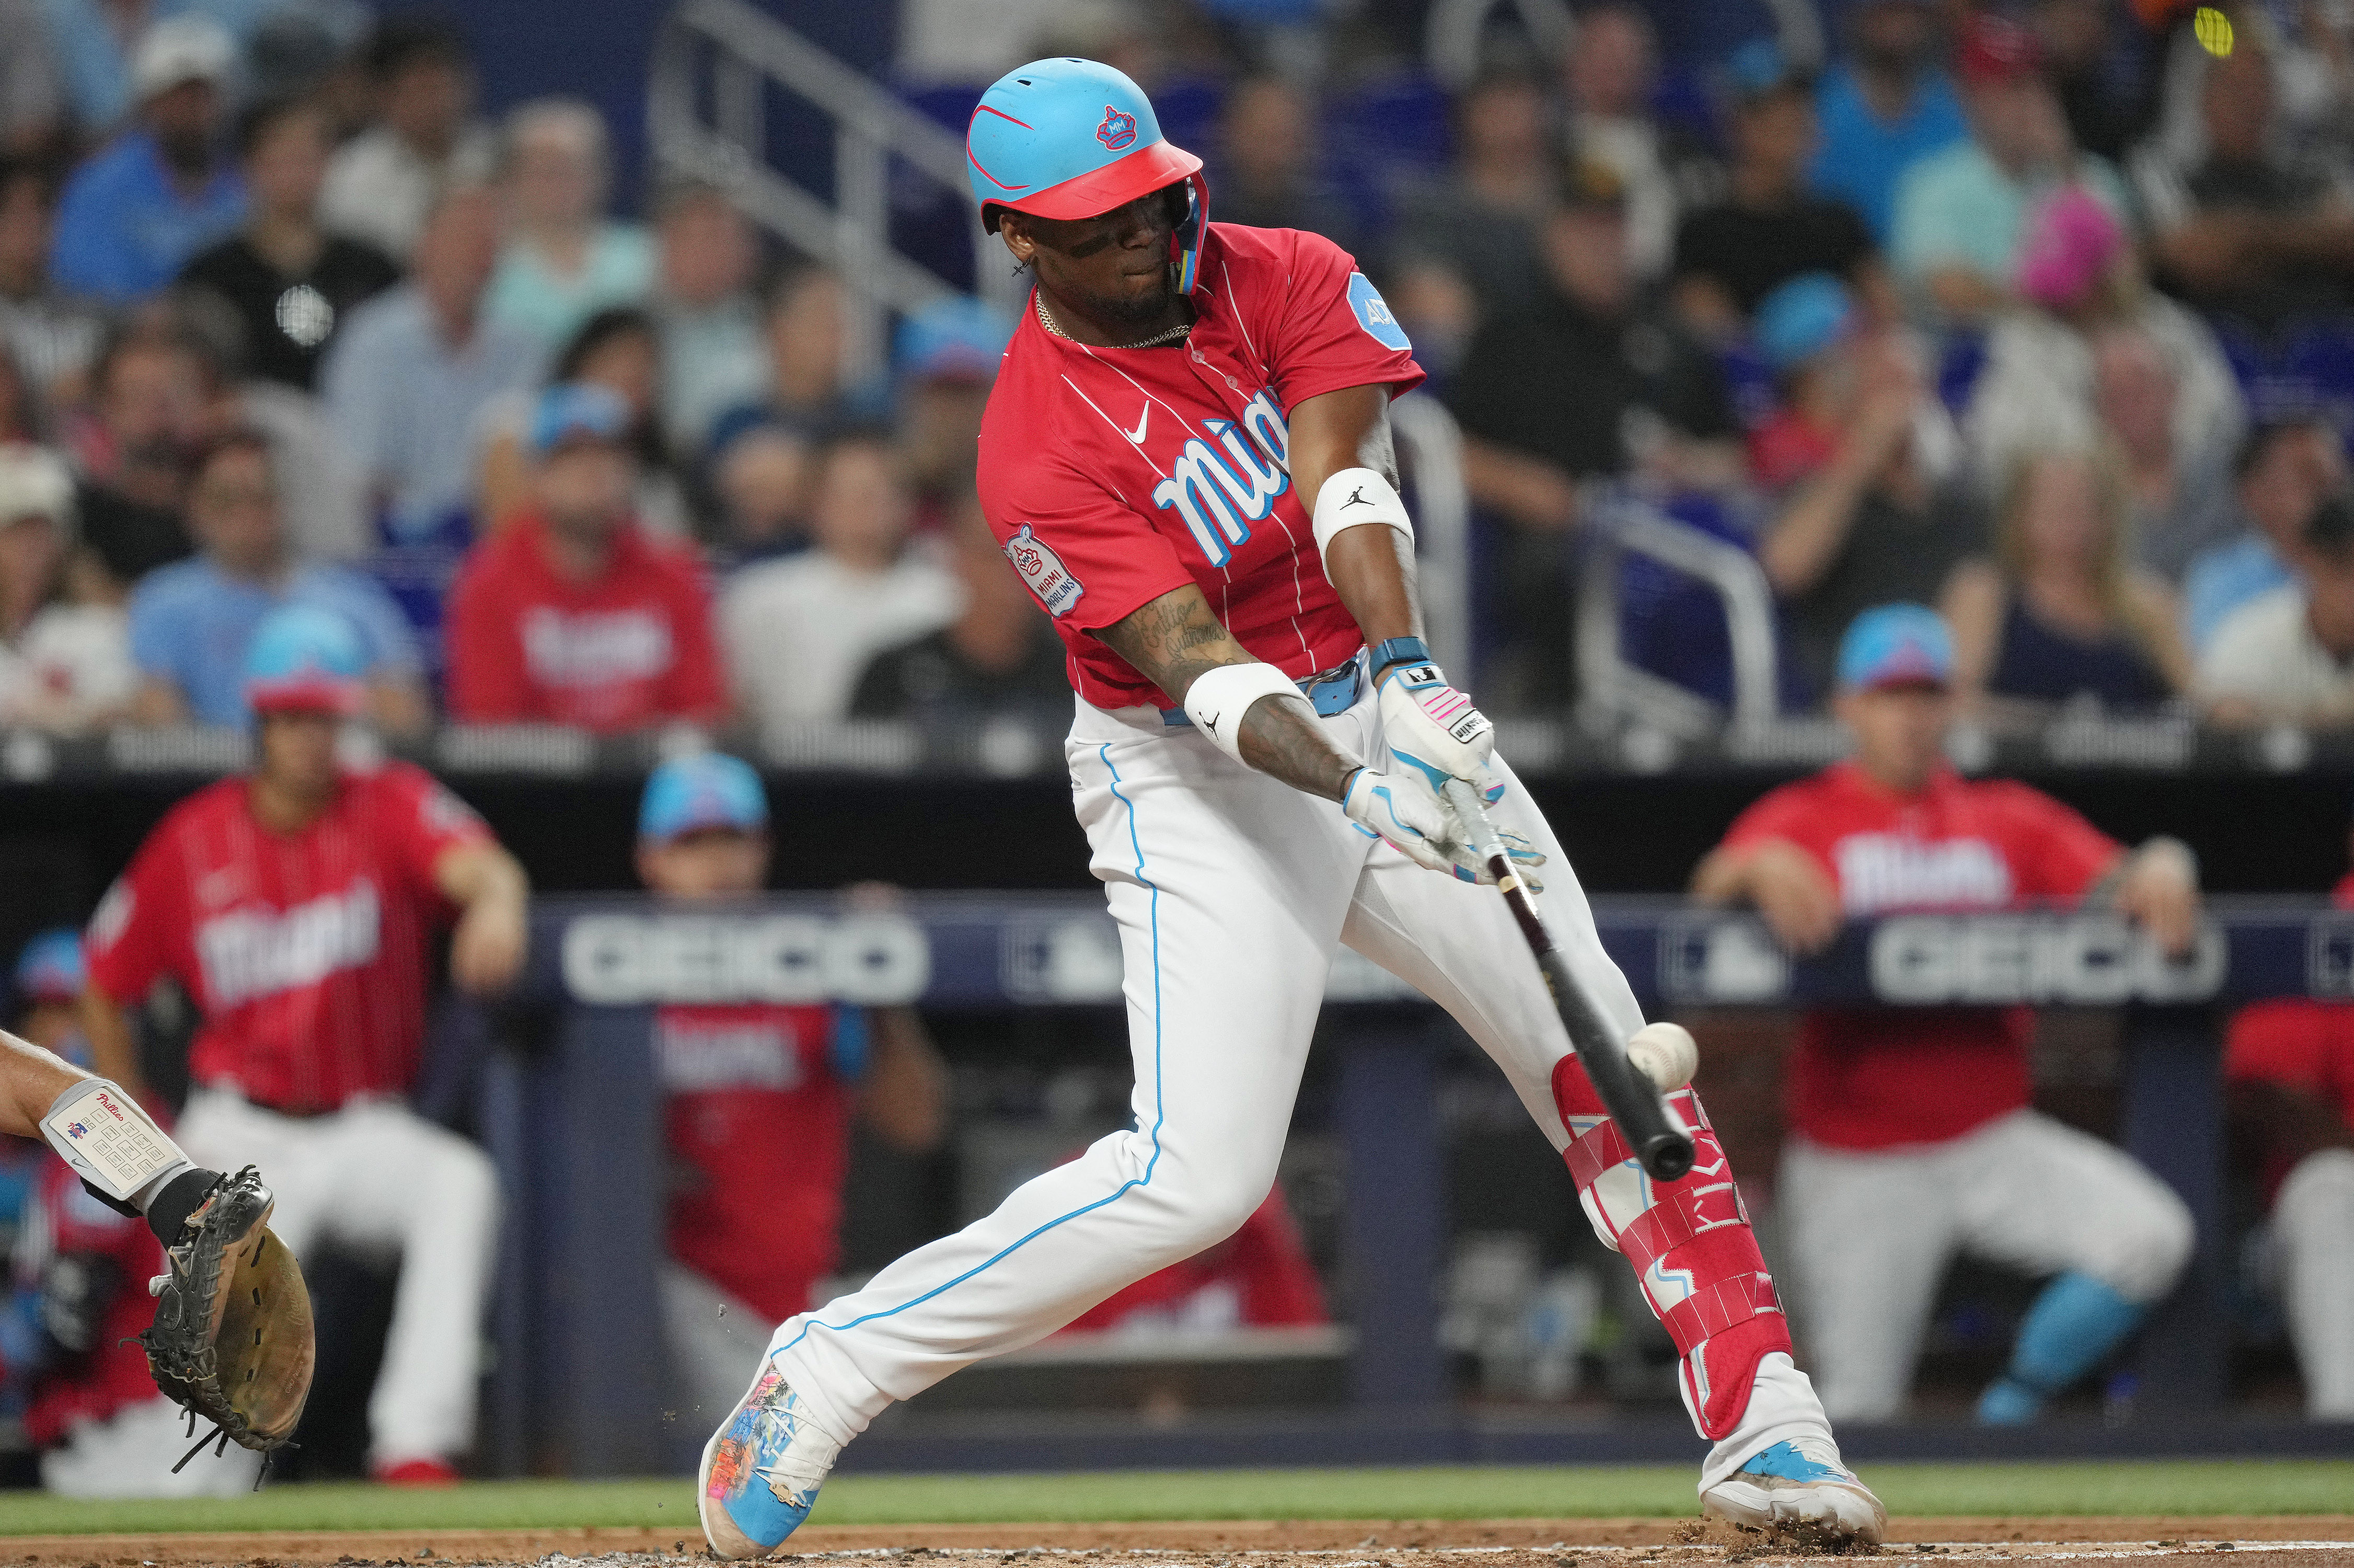 Phillies badly need a winning streak after Marlins loss